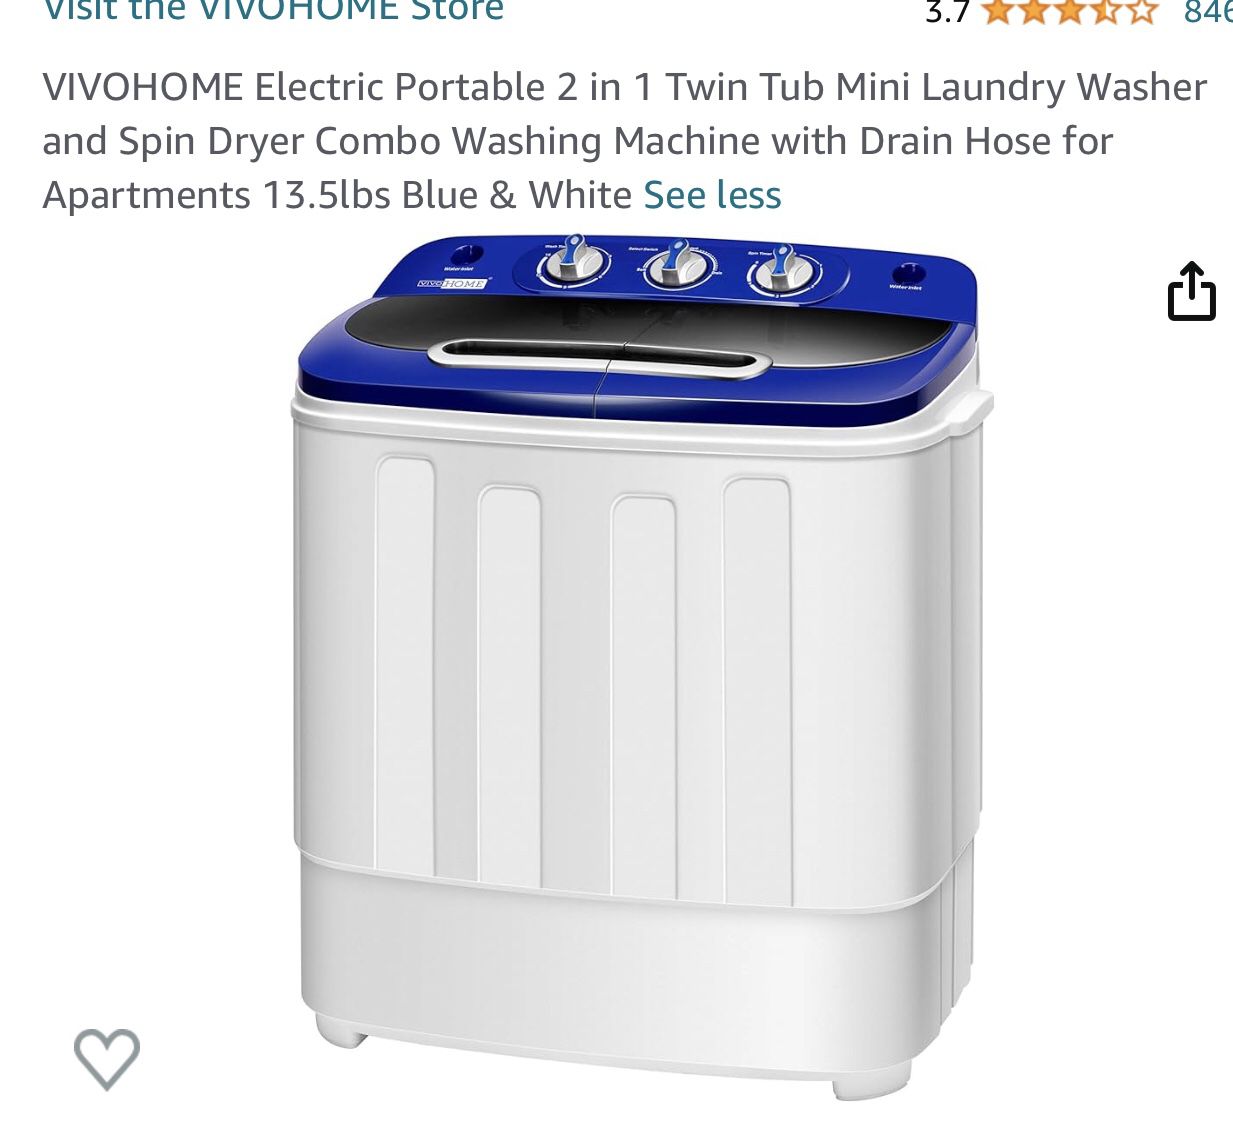 VIVOHOME Electric Portable 2n1Twin Tub Laundry Washer and Spin Dryer Combo Washing Machine